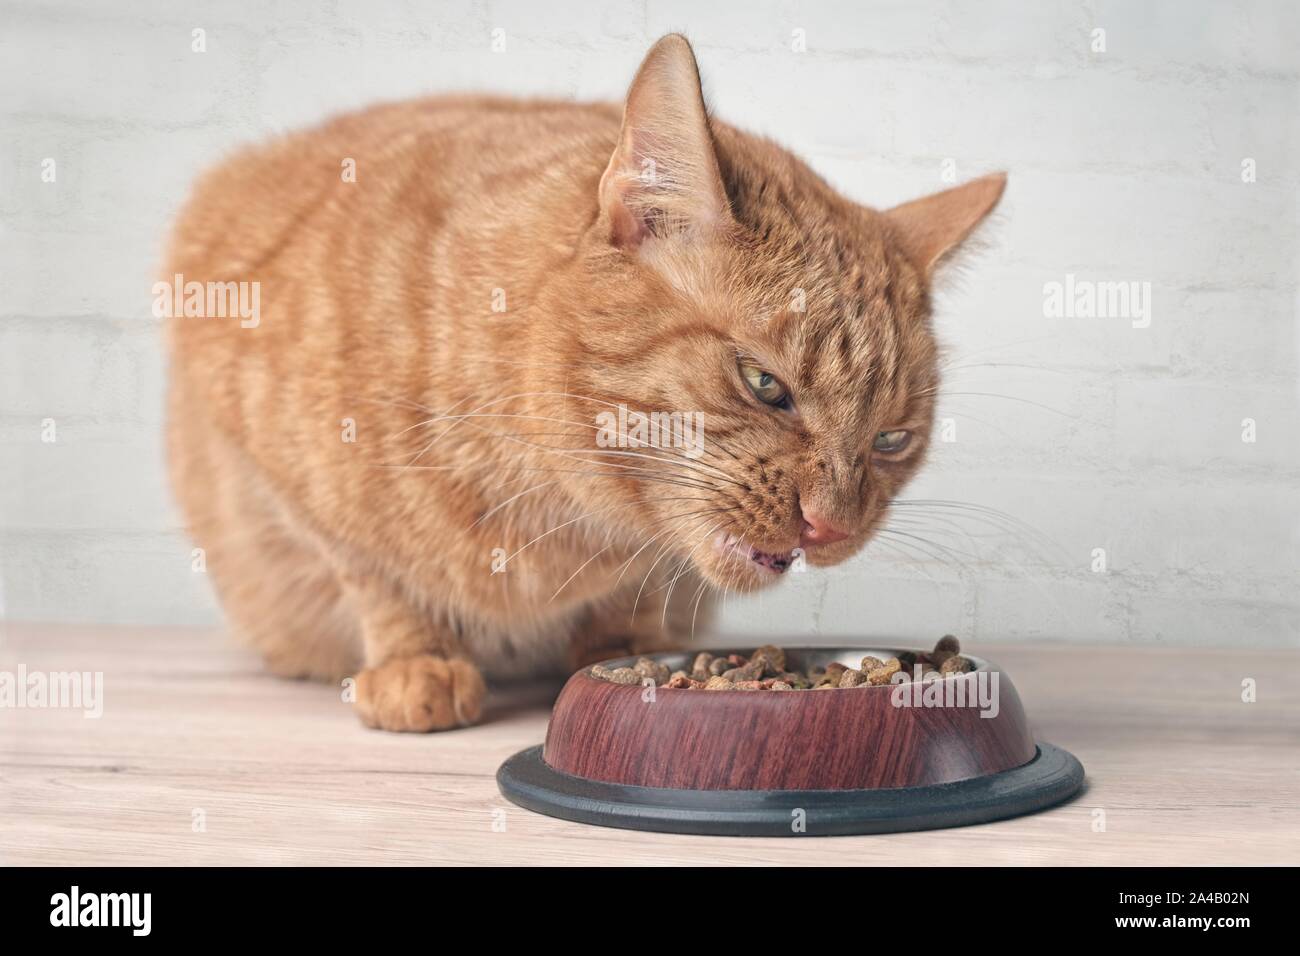 Funny ginger cat eating dry food from a food bowl. Stock Photo